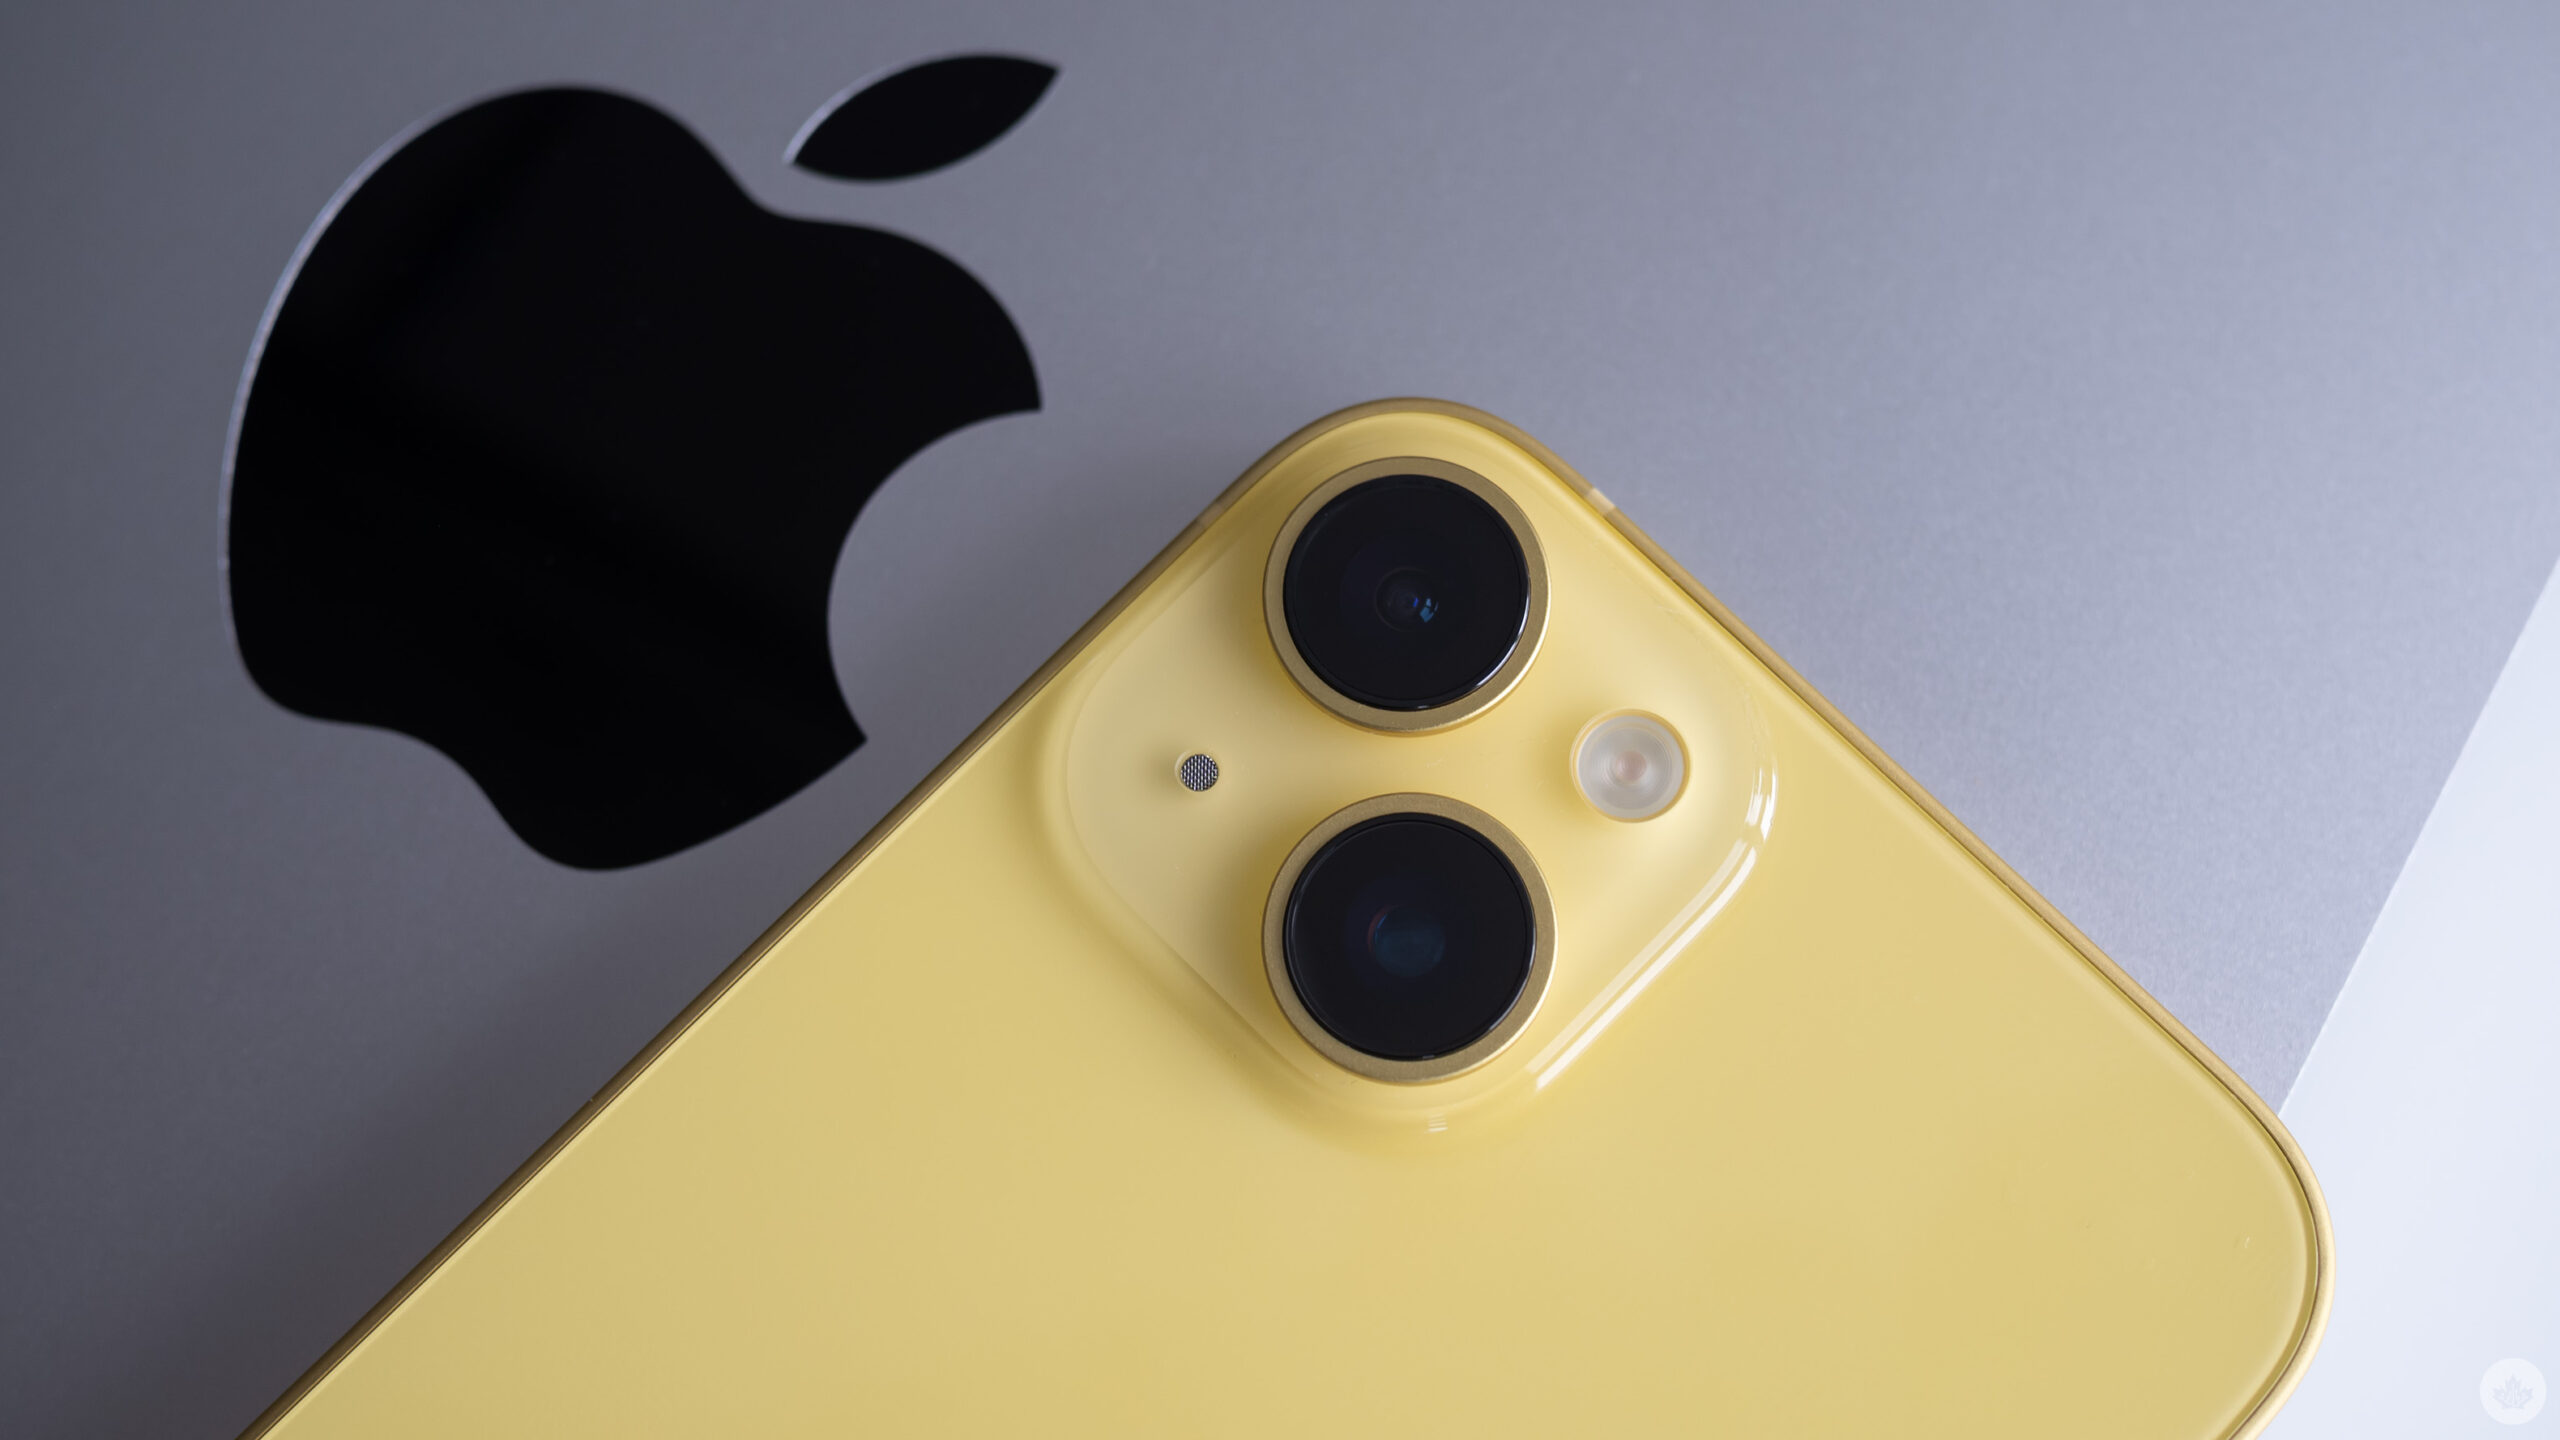 Yellow iPhone and Apple logo